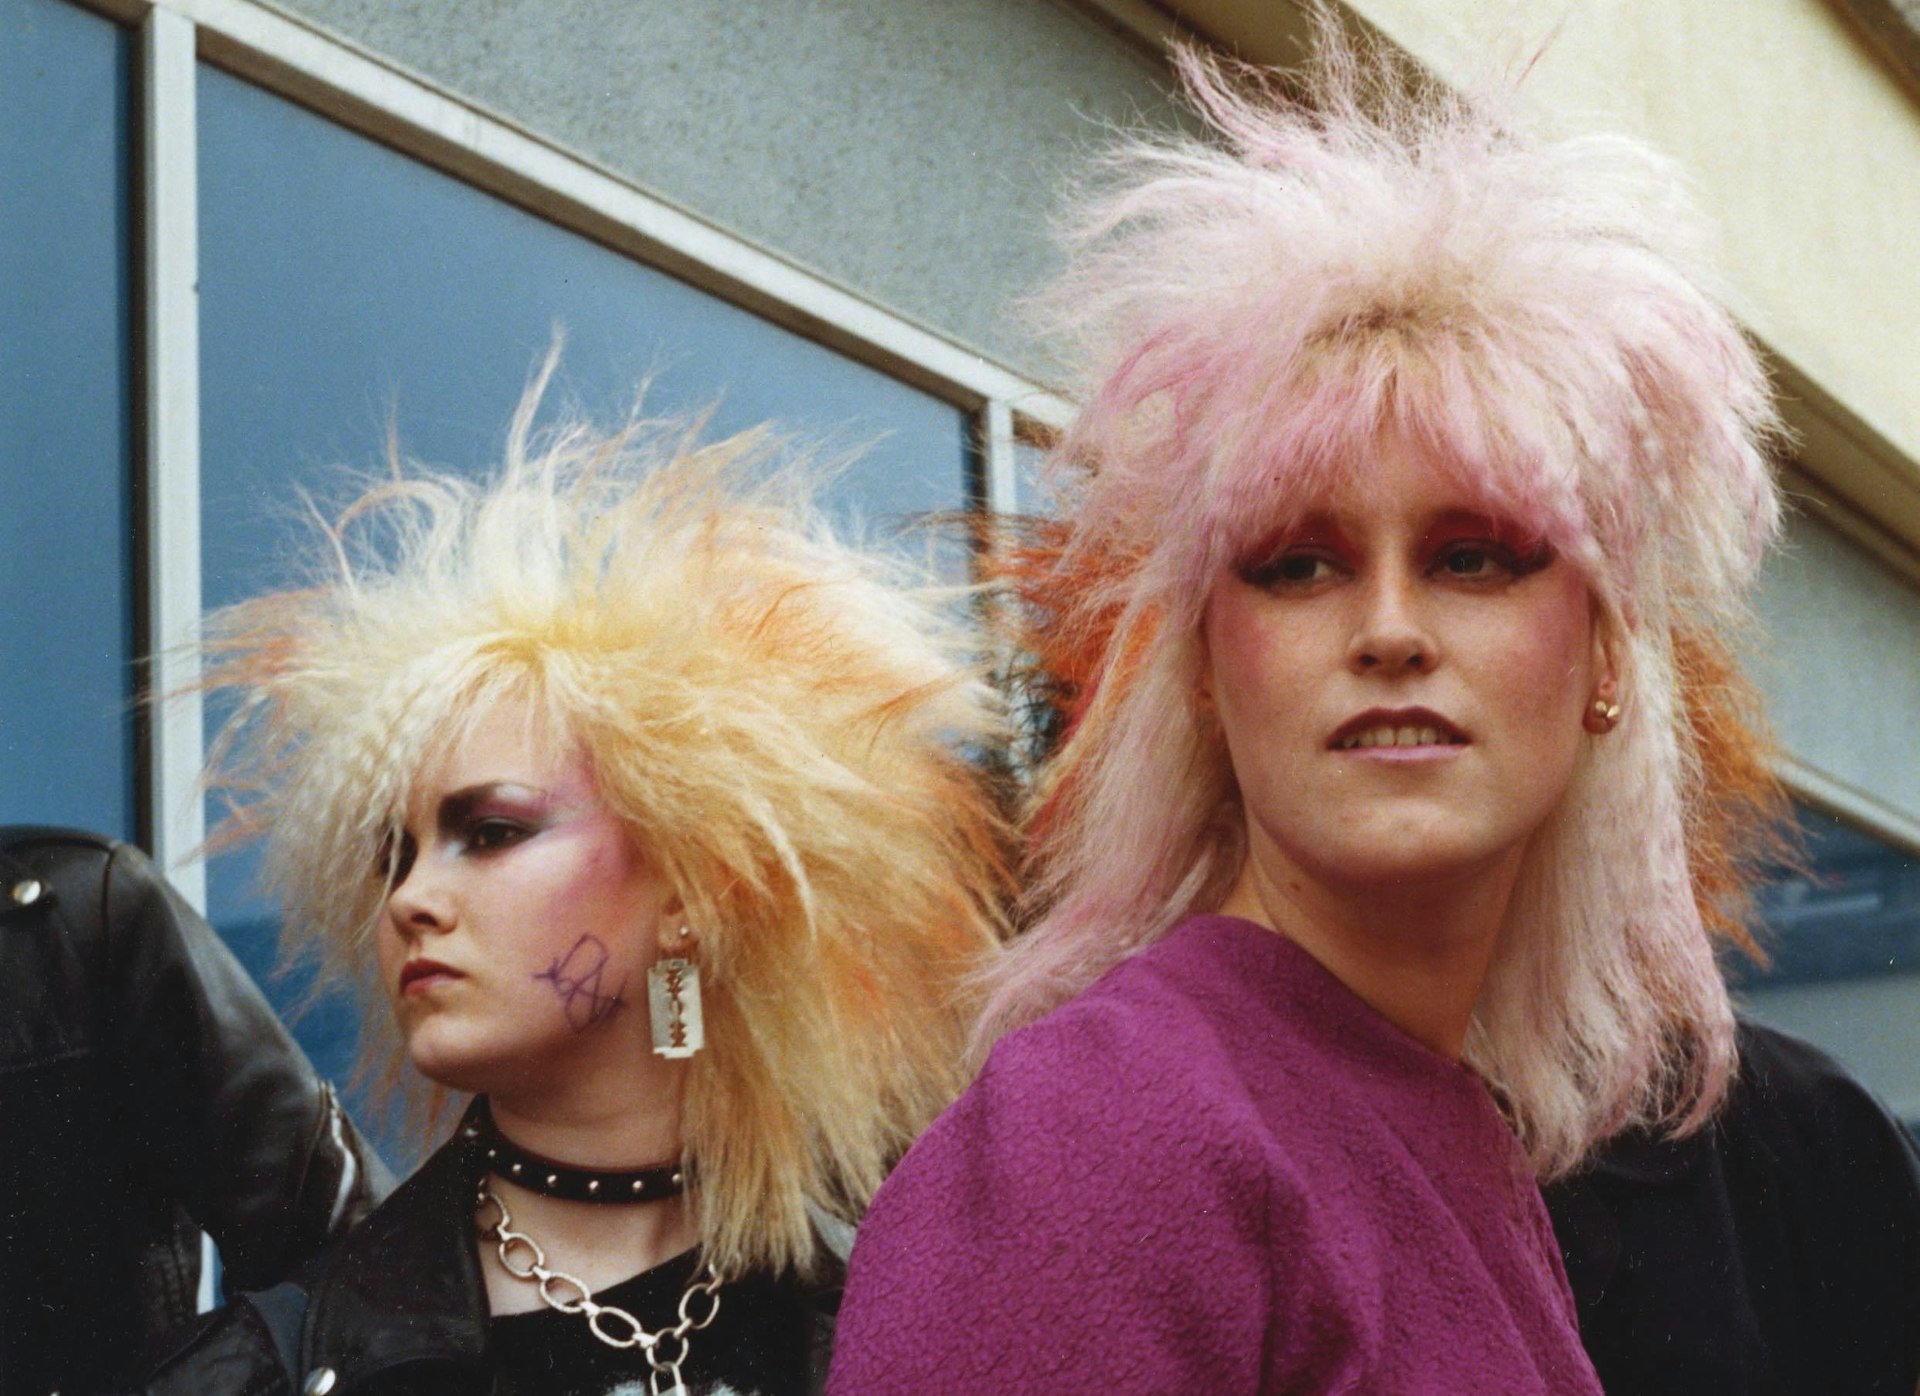 A life in colour: Capturing the punks of 1980s Britain